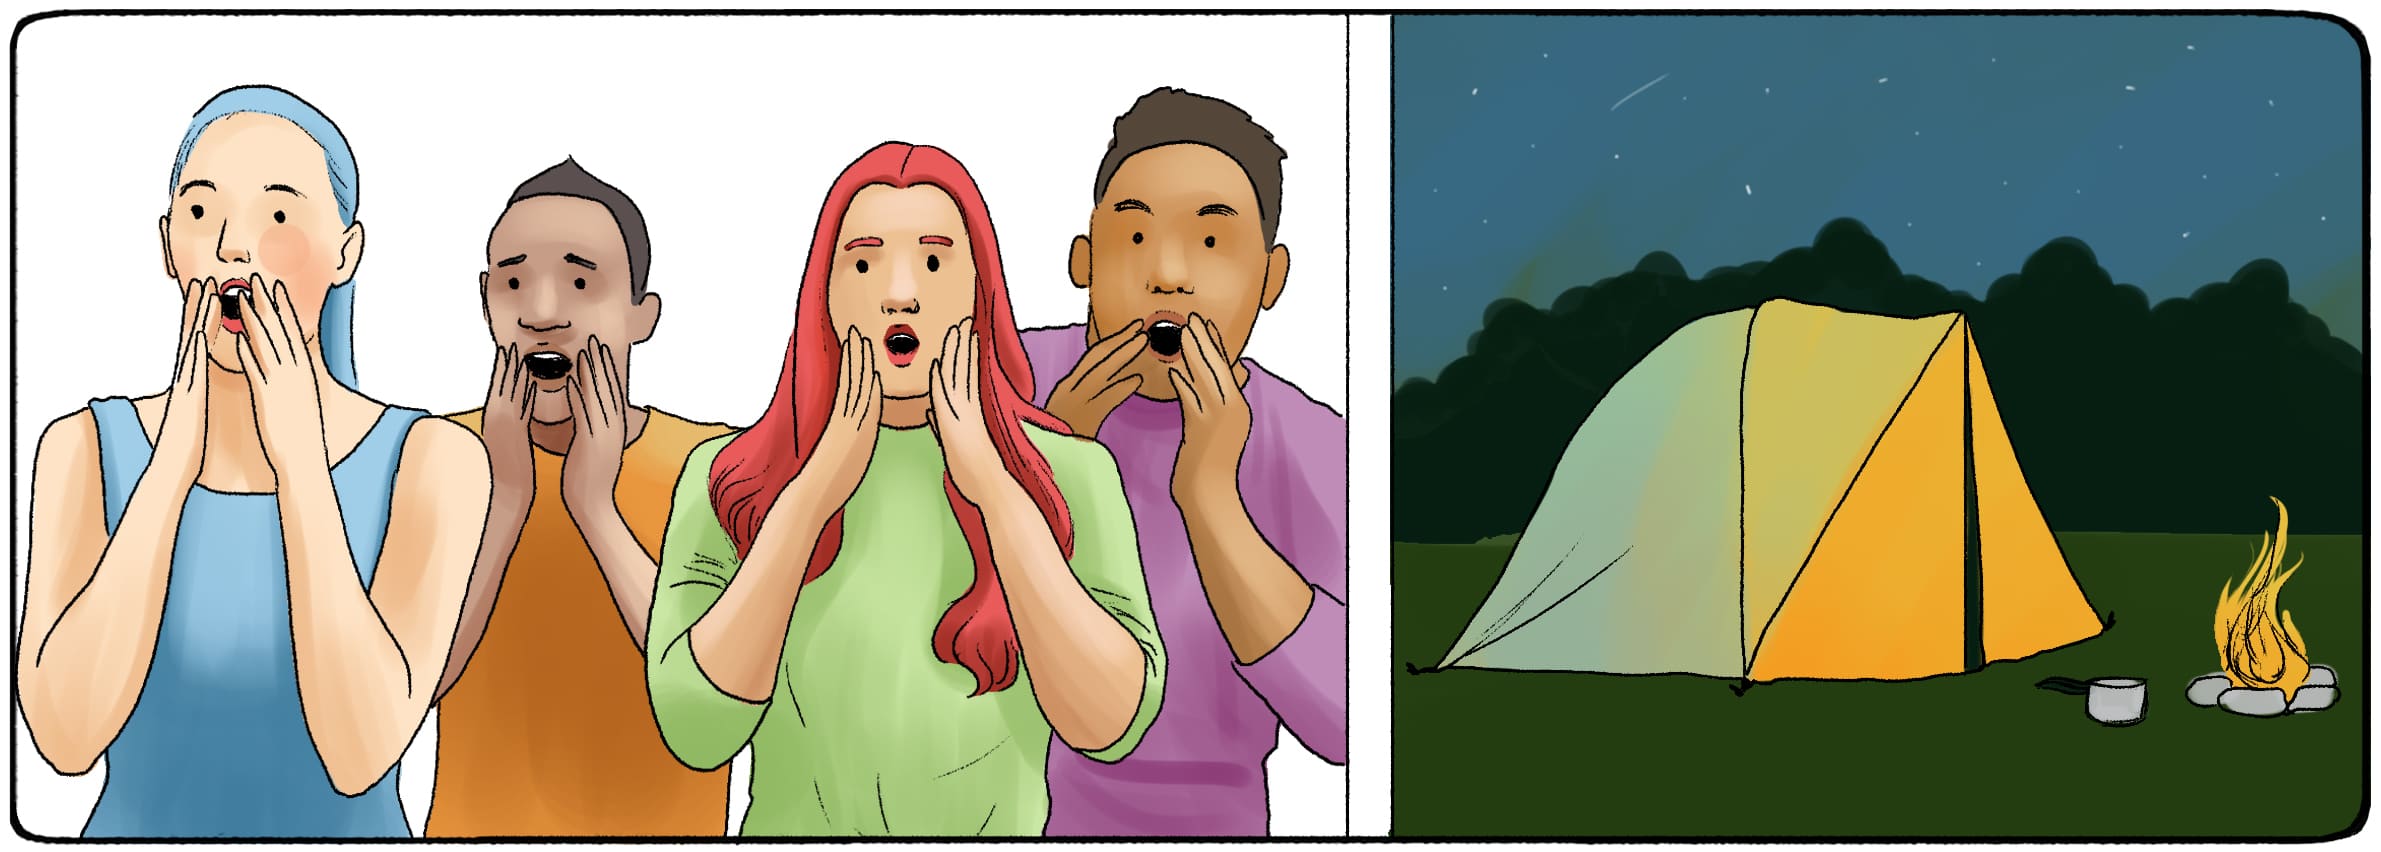 people gasping in one image, a tent in the other